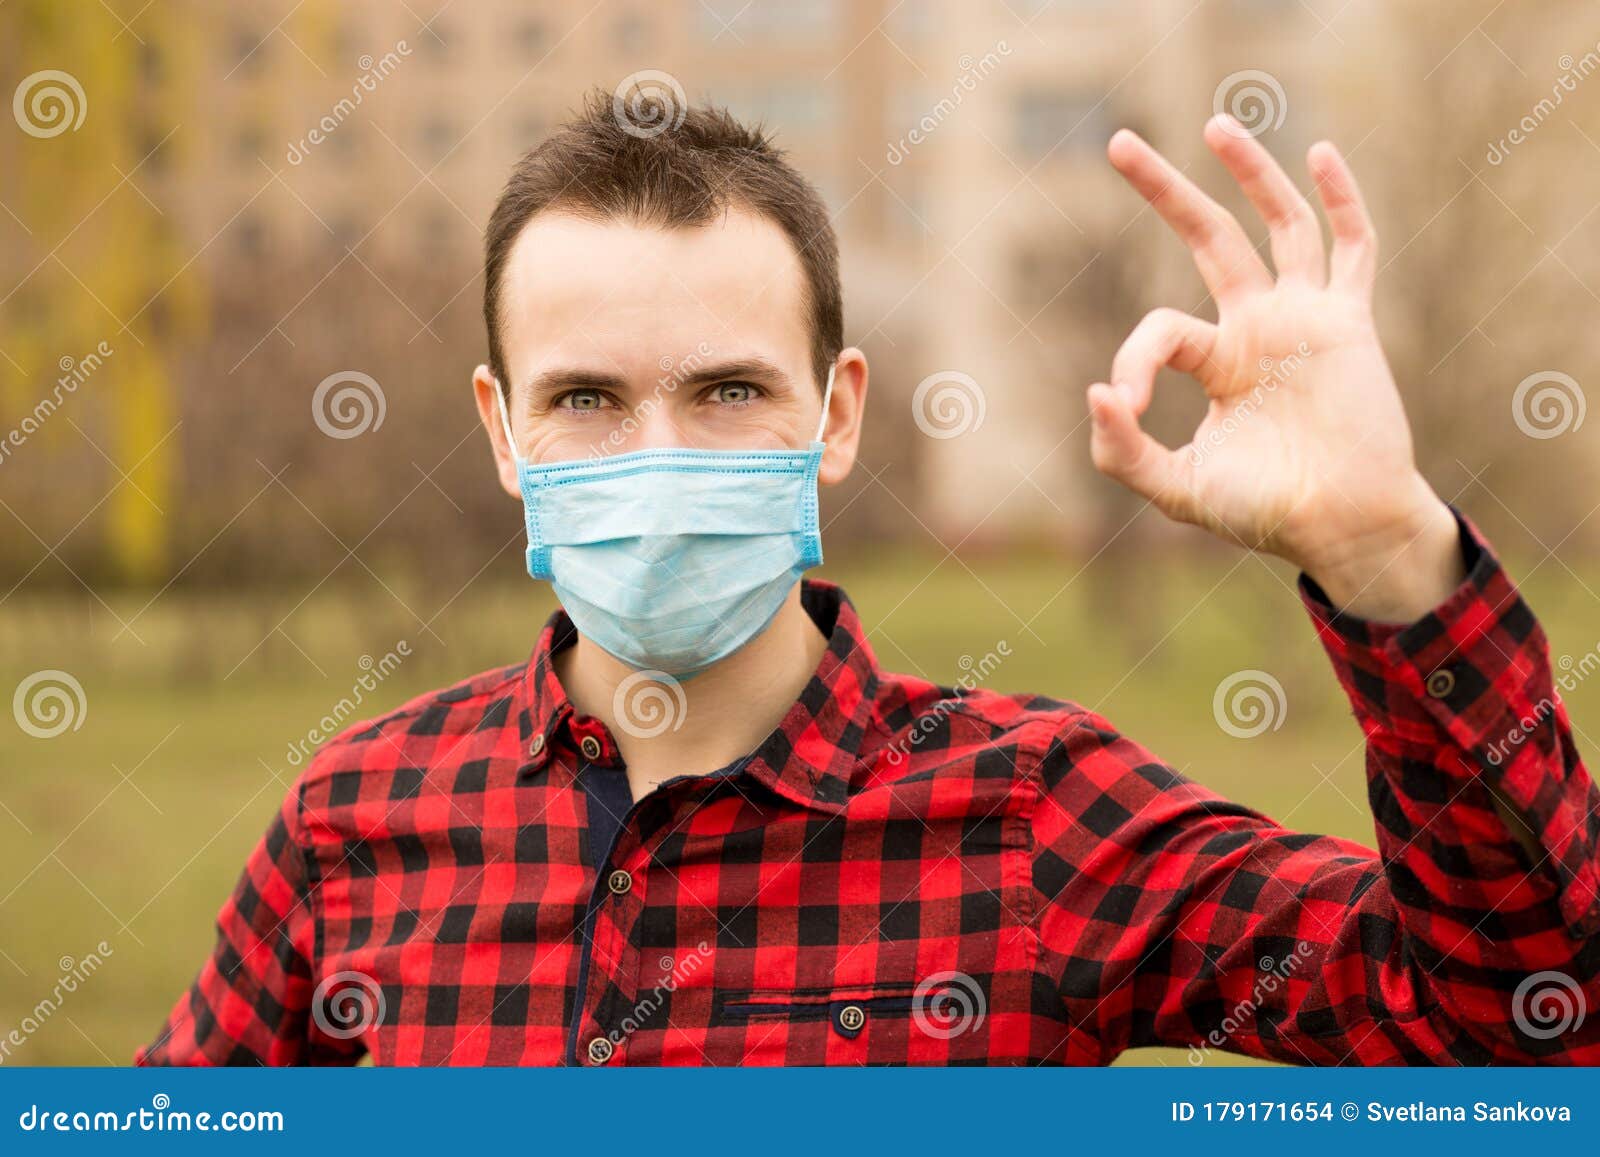 Serenity Man Wearing Protective Mask Show Gesture Ok Using Hand Up Walk ...